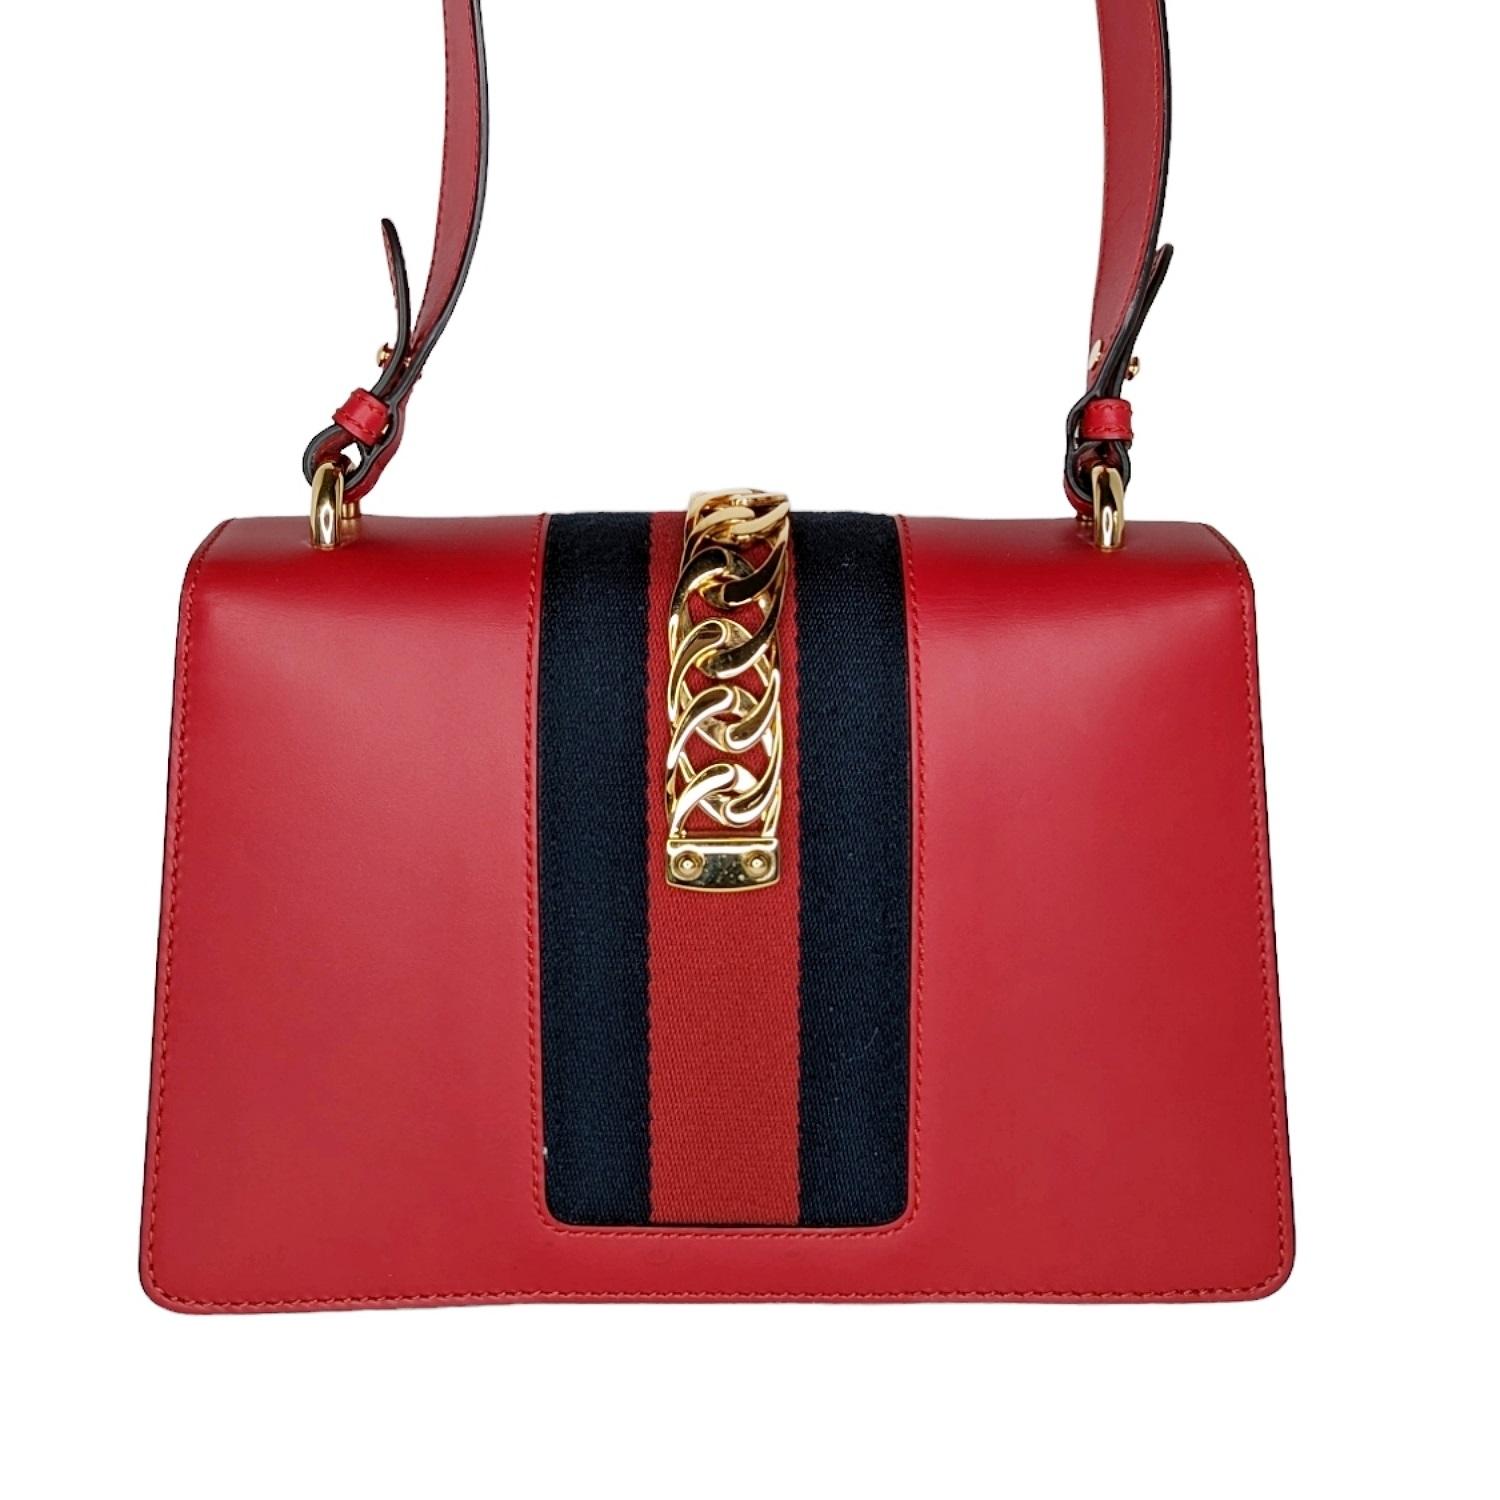 This chic structured shoulder bag is crafted of smooth red calfskin leather and features a prominent front flap detailed with a central canvas red and navy blue web stripe. The bag features a red leather top strap and a shoulder strap of twisted